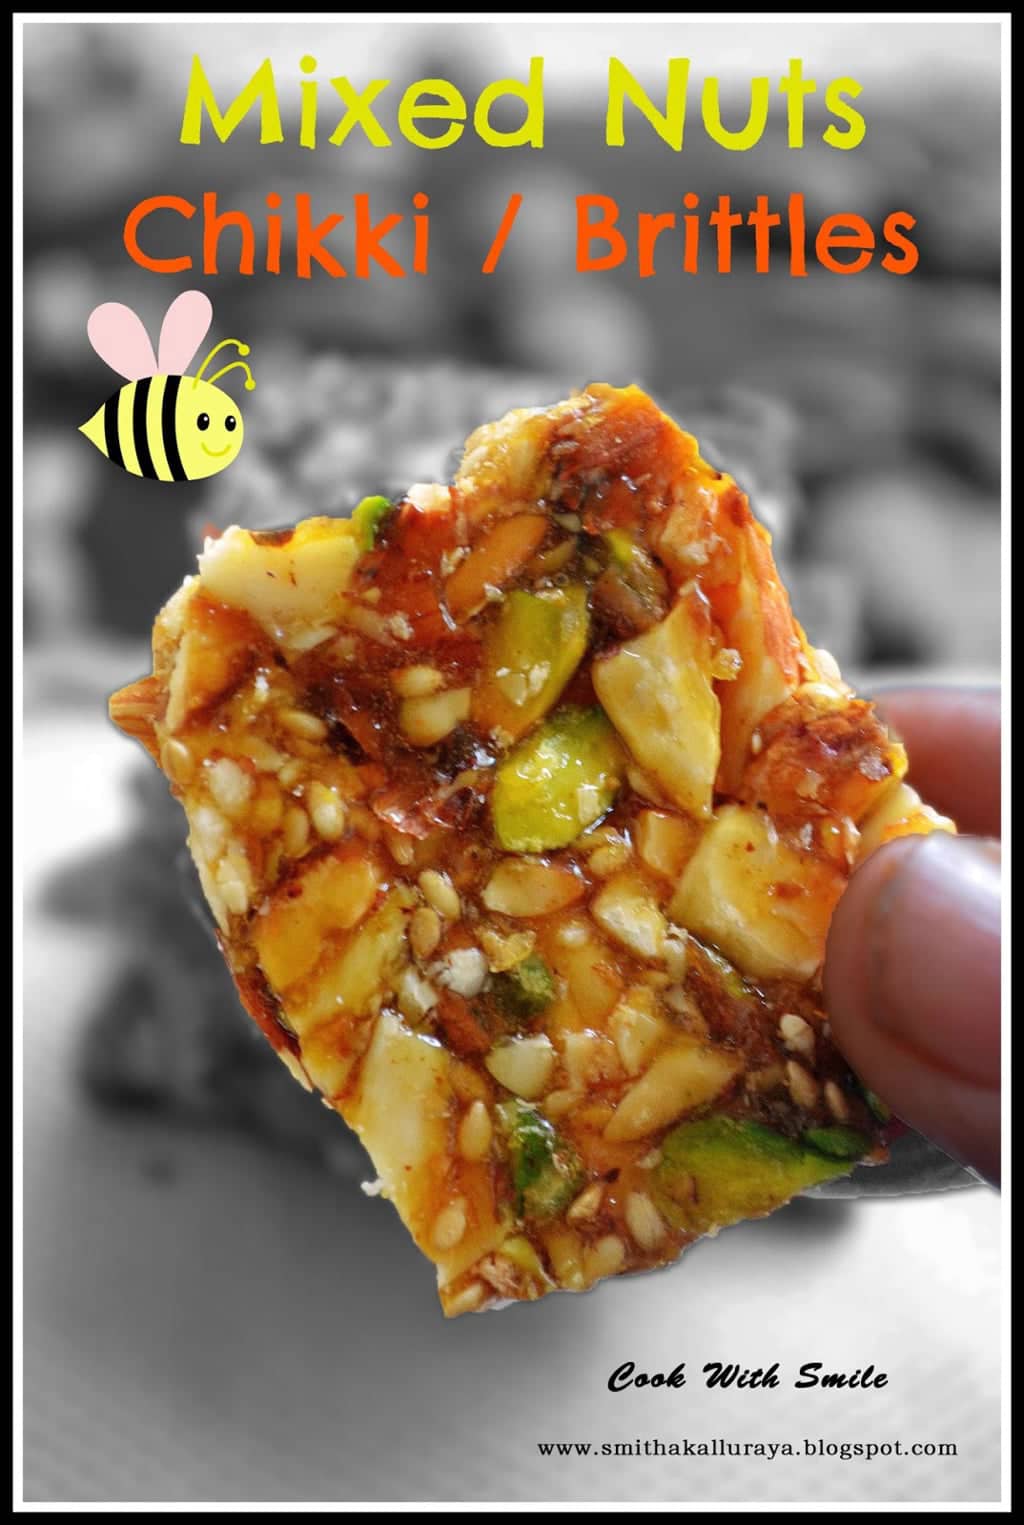 MIXED NUTS BRITTLE